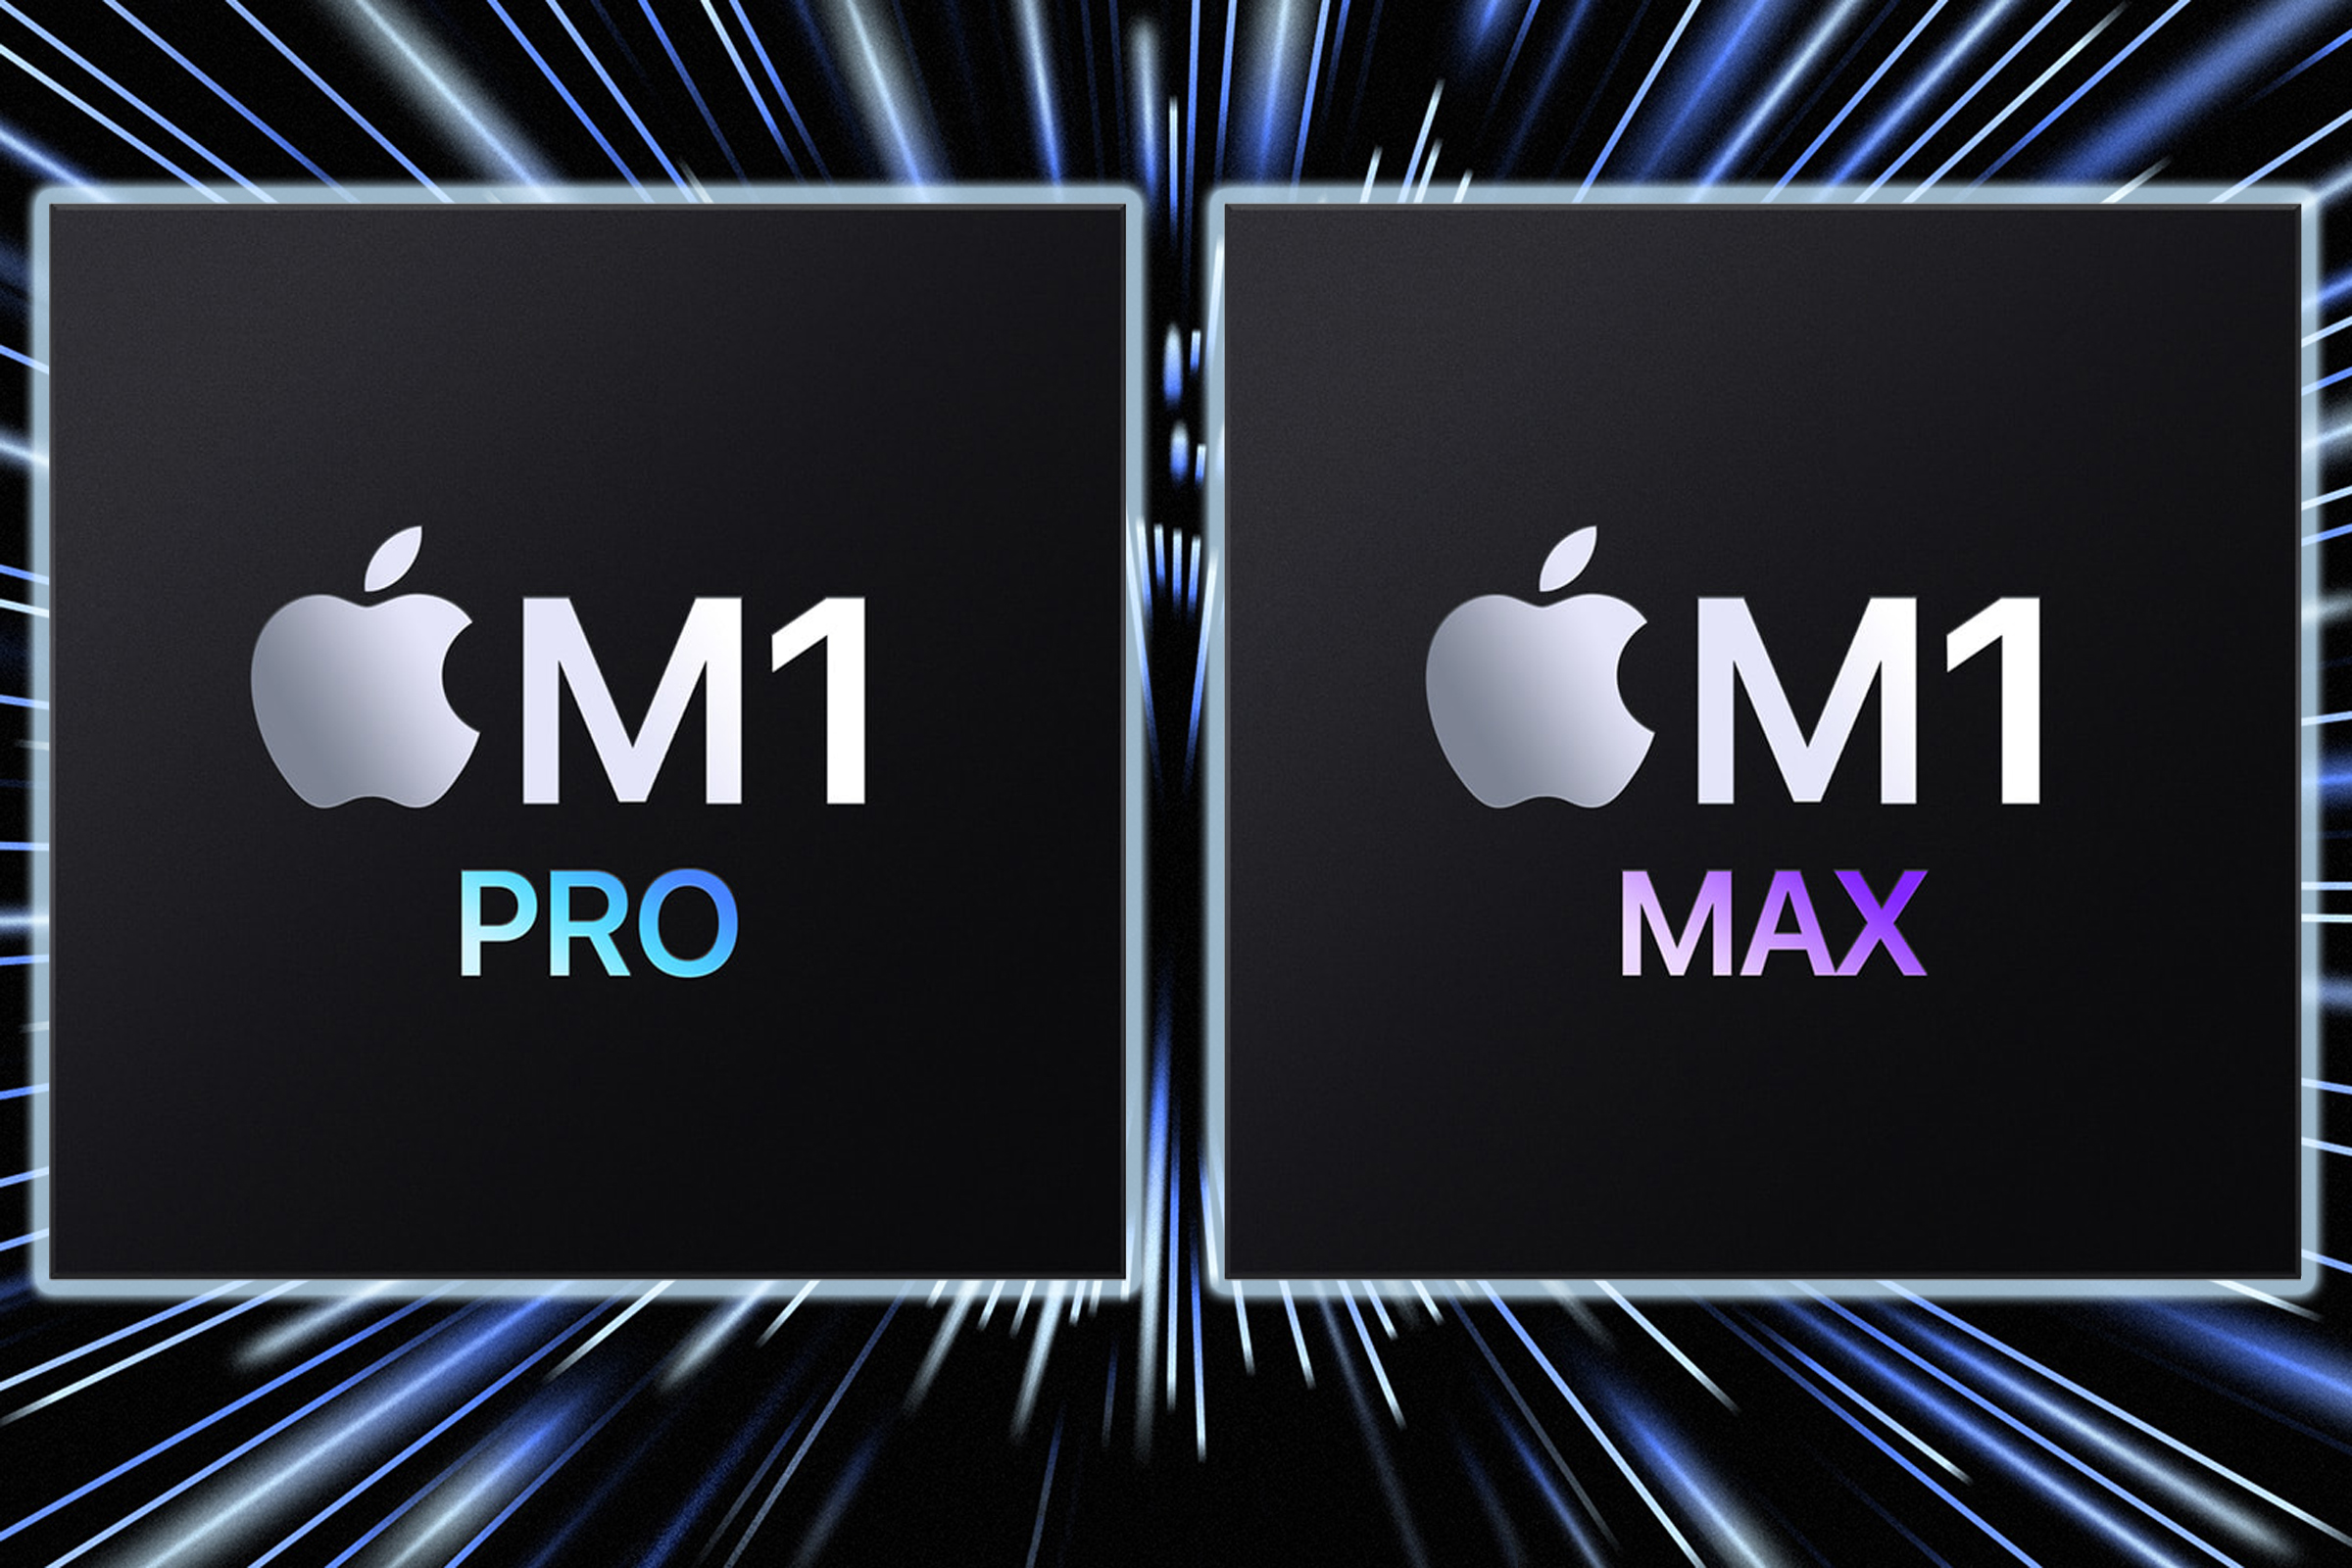 181% faster graphics thanks to the Apple M1 Max